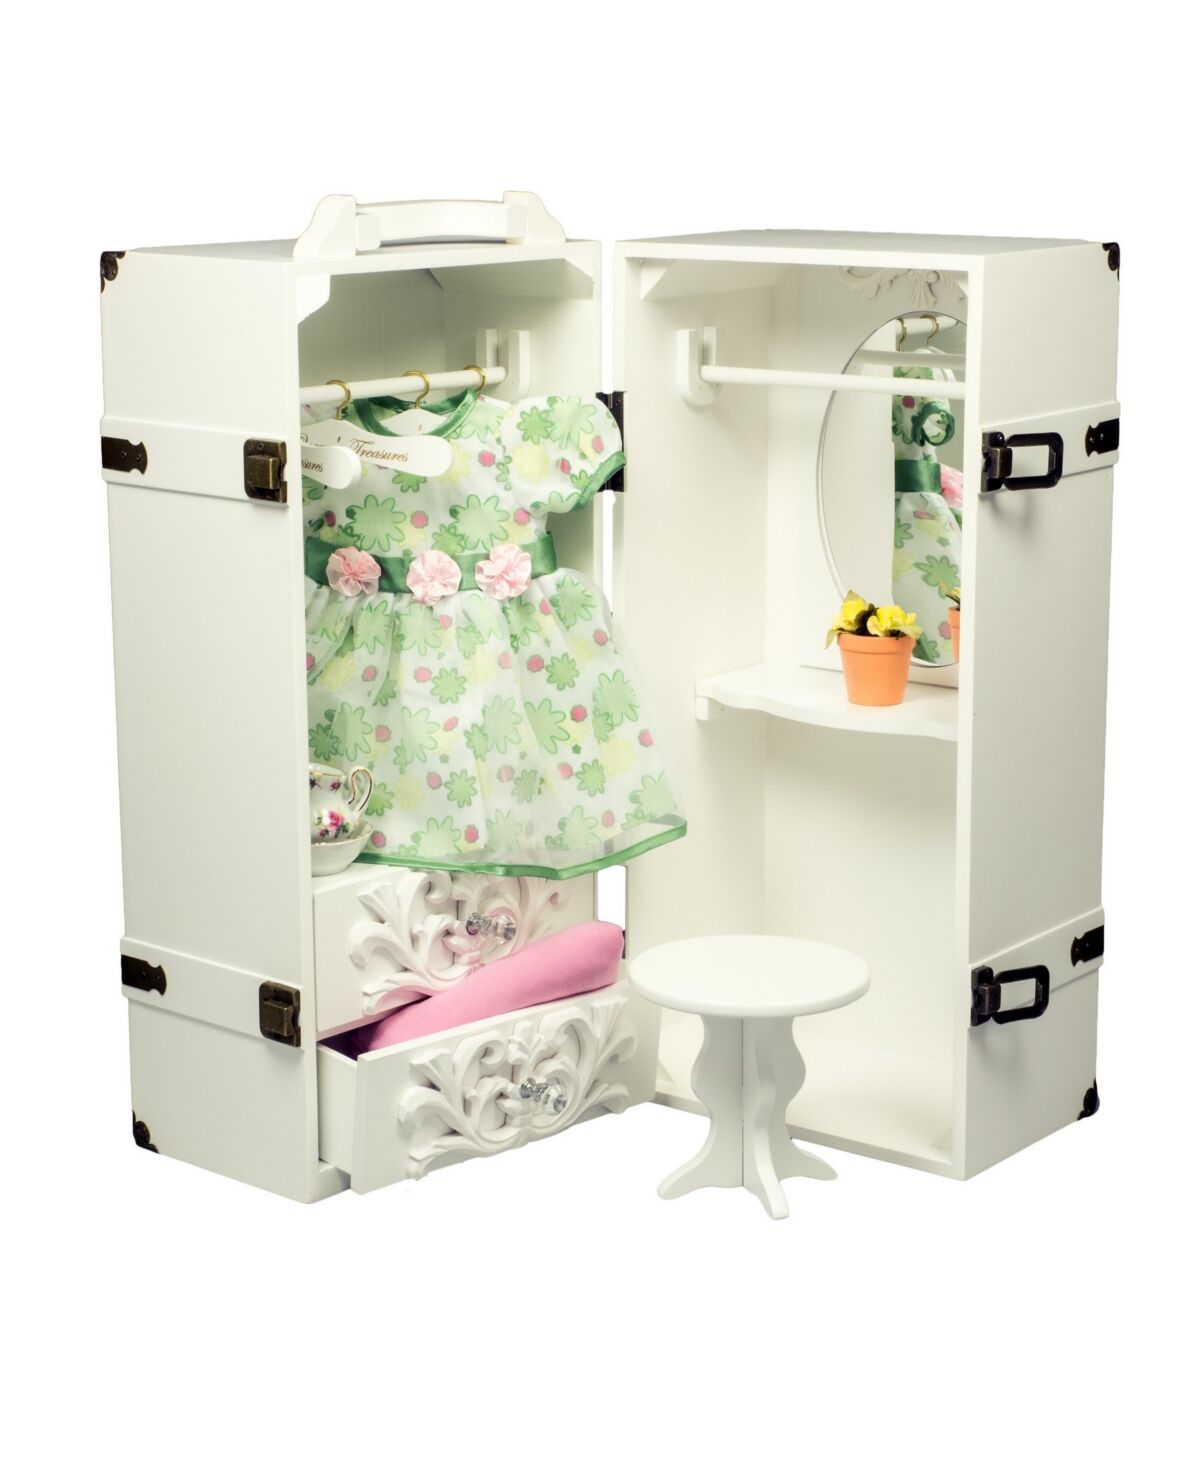 The Queen's Treasures 18 Inch Doll Clothes Storage Case Furniture, Fully Assembled White Wooden Trunk Includes Vanity, Stool, Hangers, Intended For Us